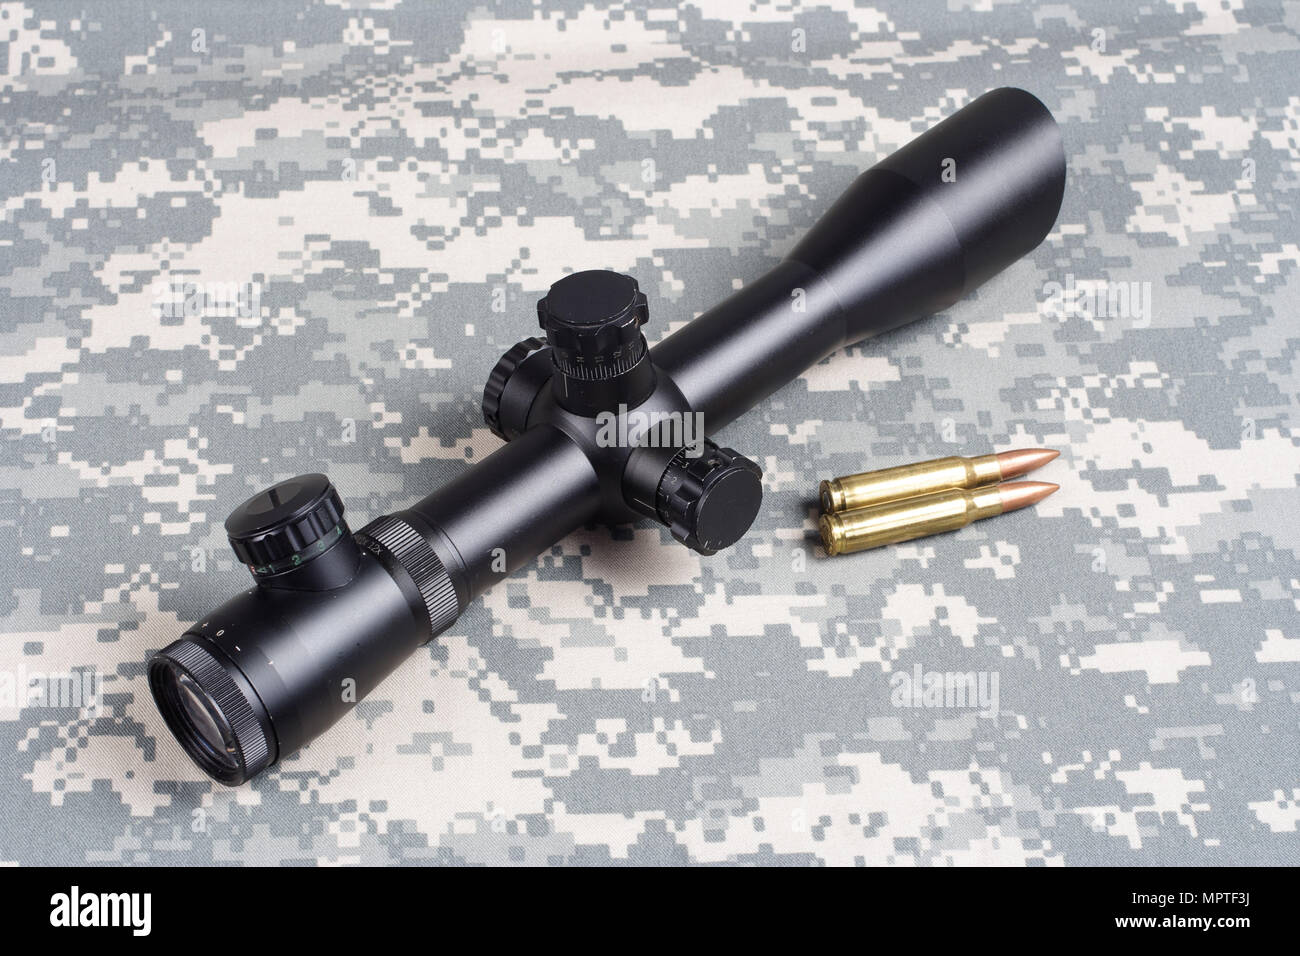 US ARMY background concept - sniper with scope and insignia Stock Photo